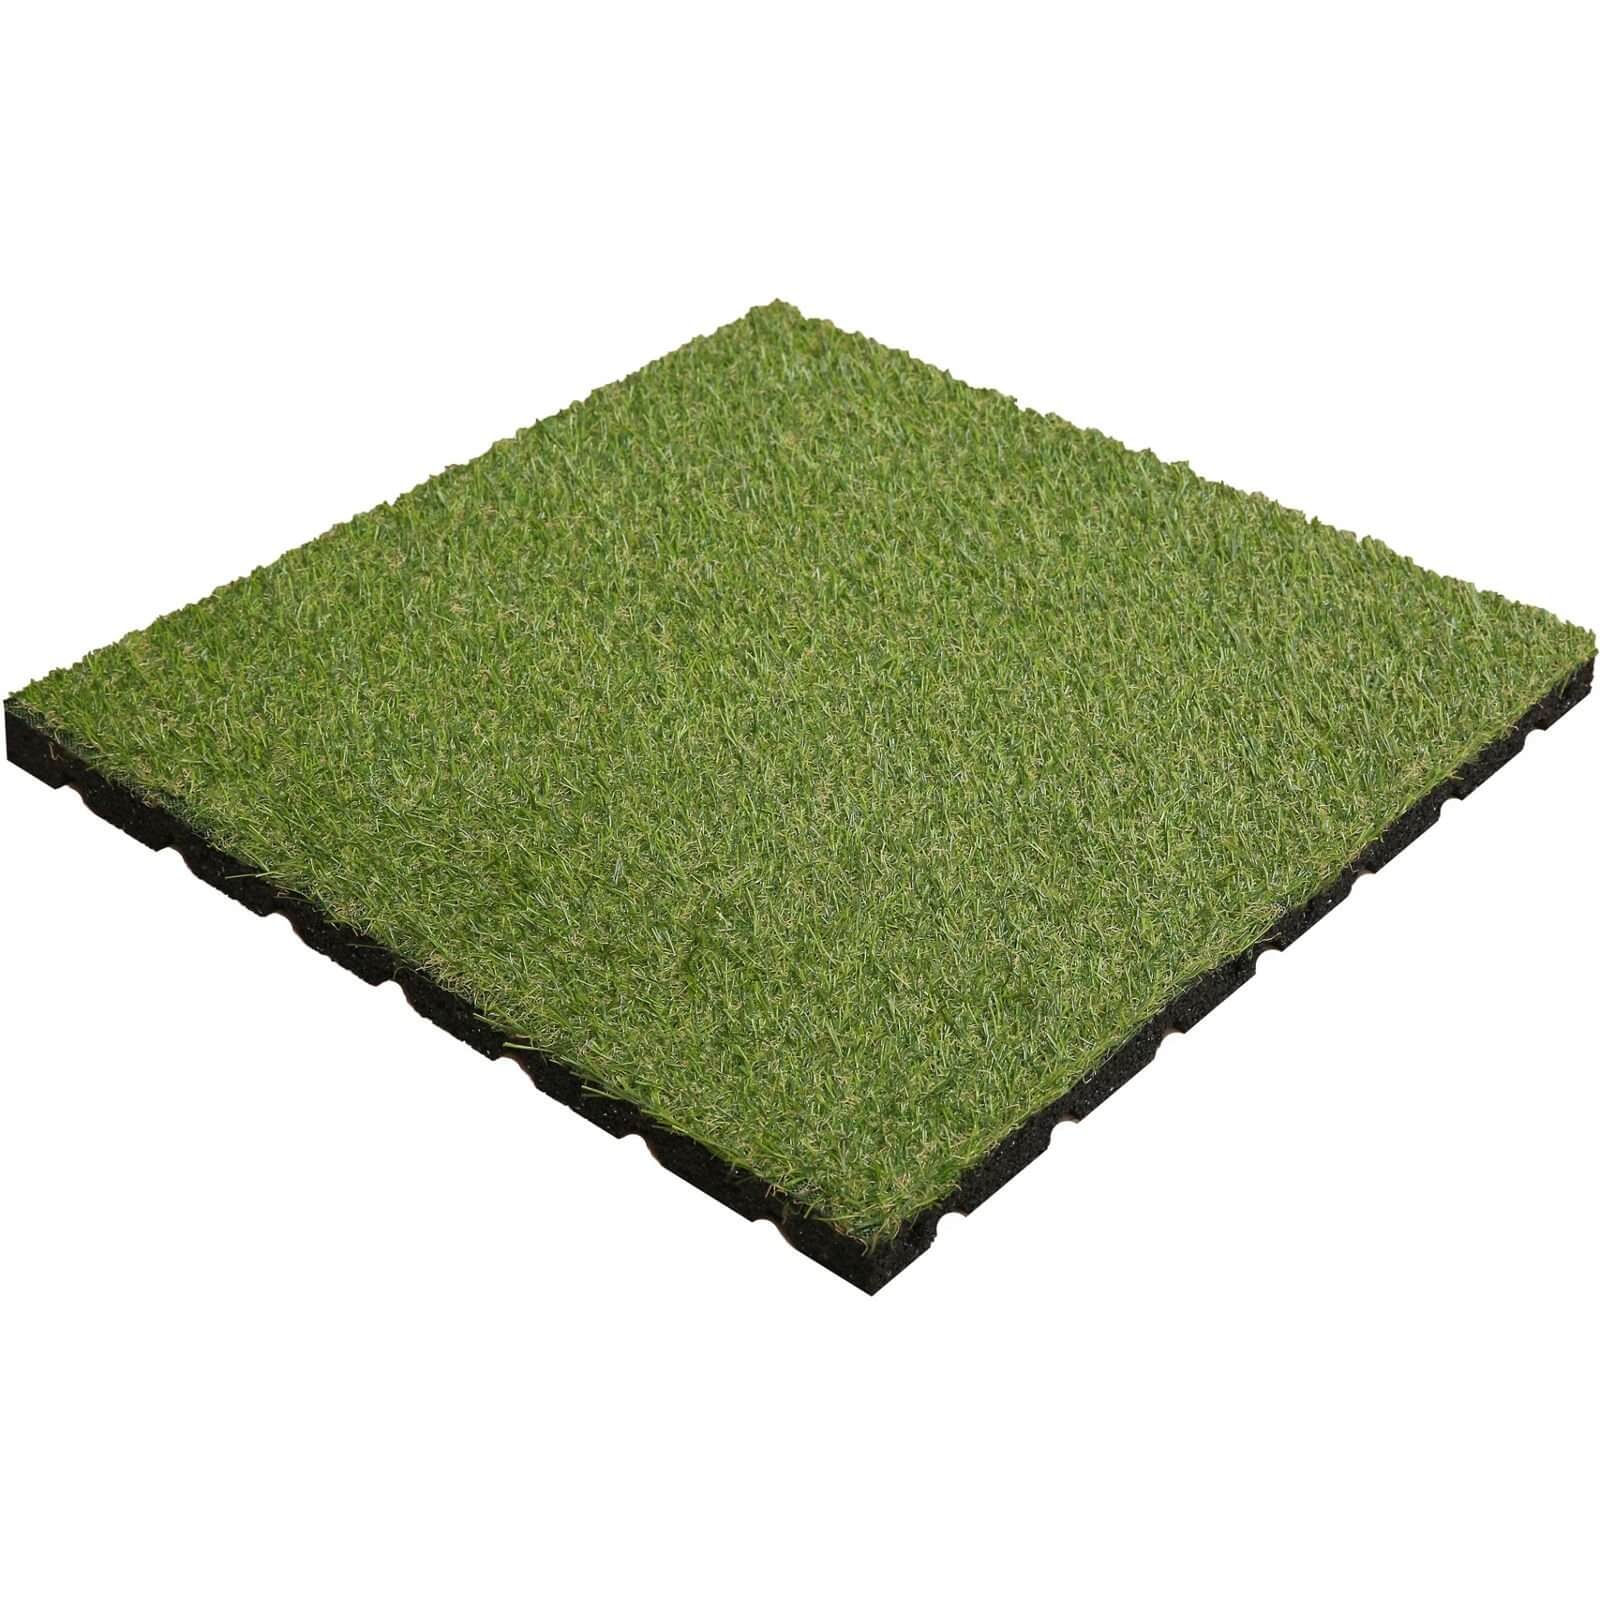 Aslon Rubber Tile with Grass - 400mm